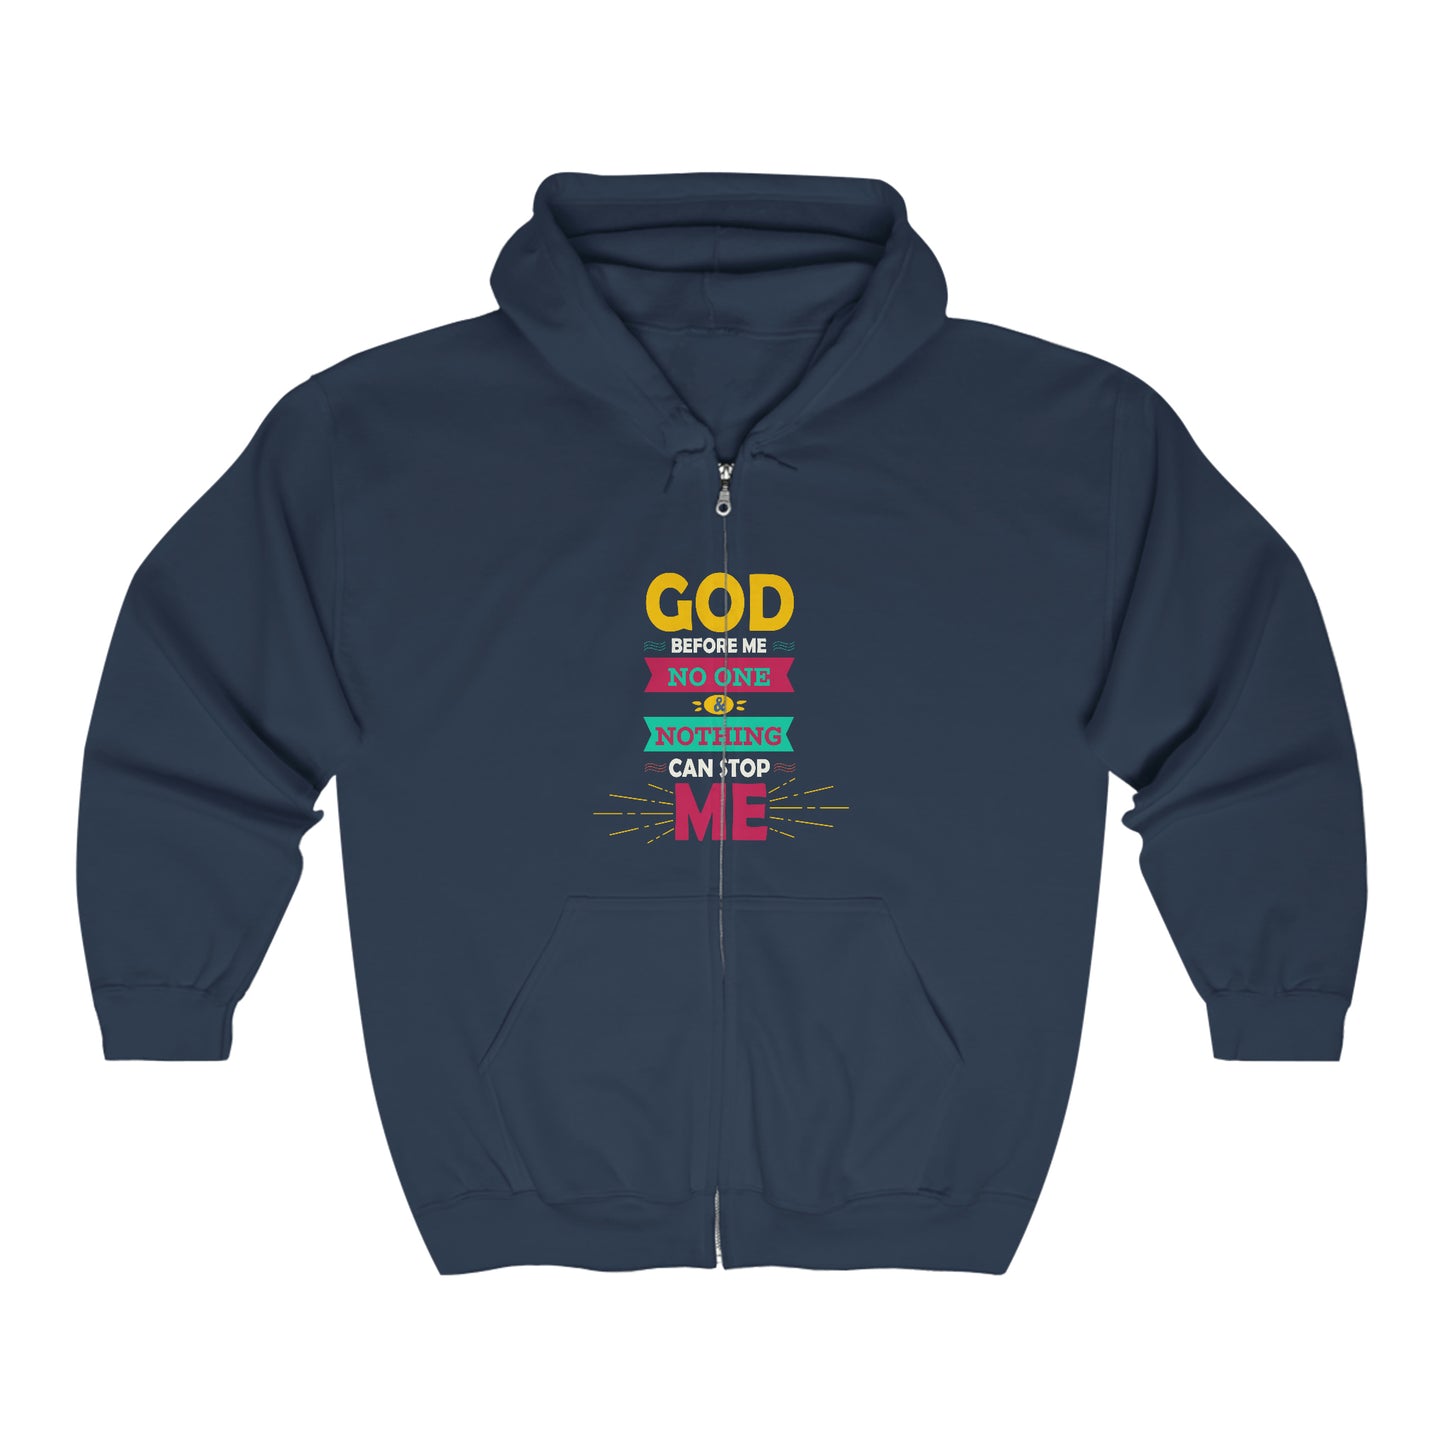 God Before Me No One & Nothing Can Stop Me Unisex Heavy Blend Full Zip Hooded Sweatshirt